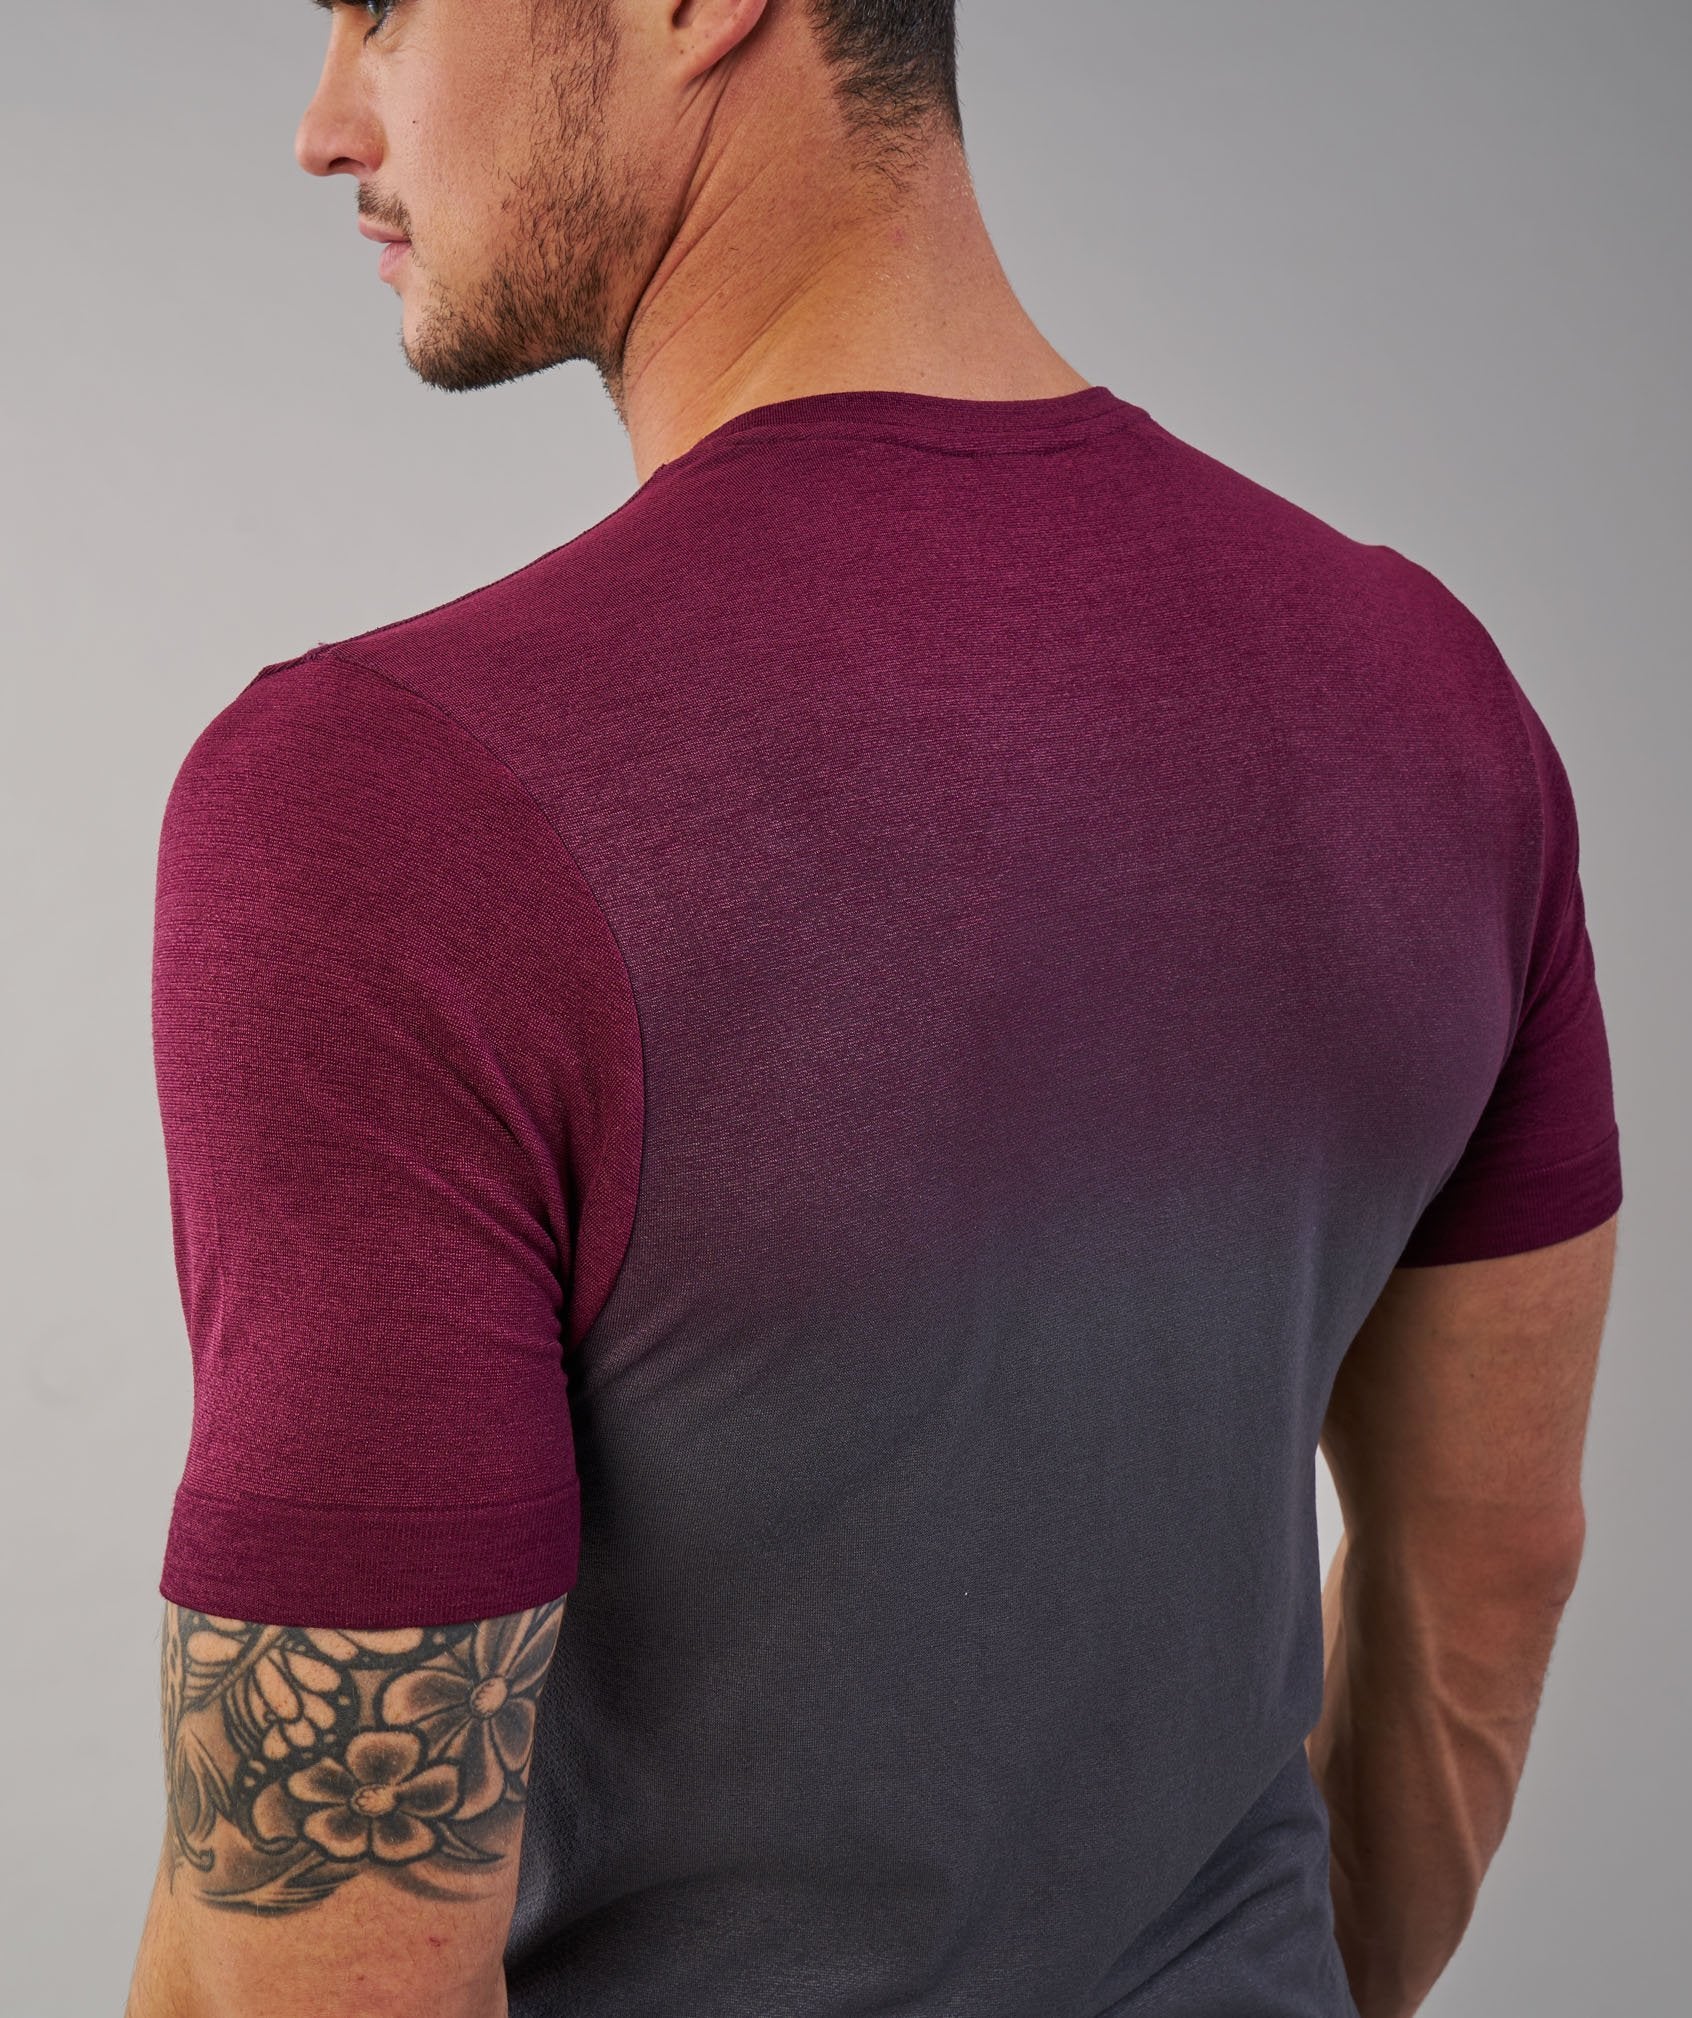 Ombre T-Shirt in Port/Charcoal - view 6